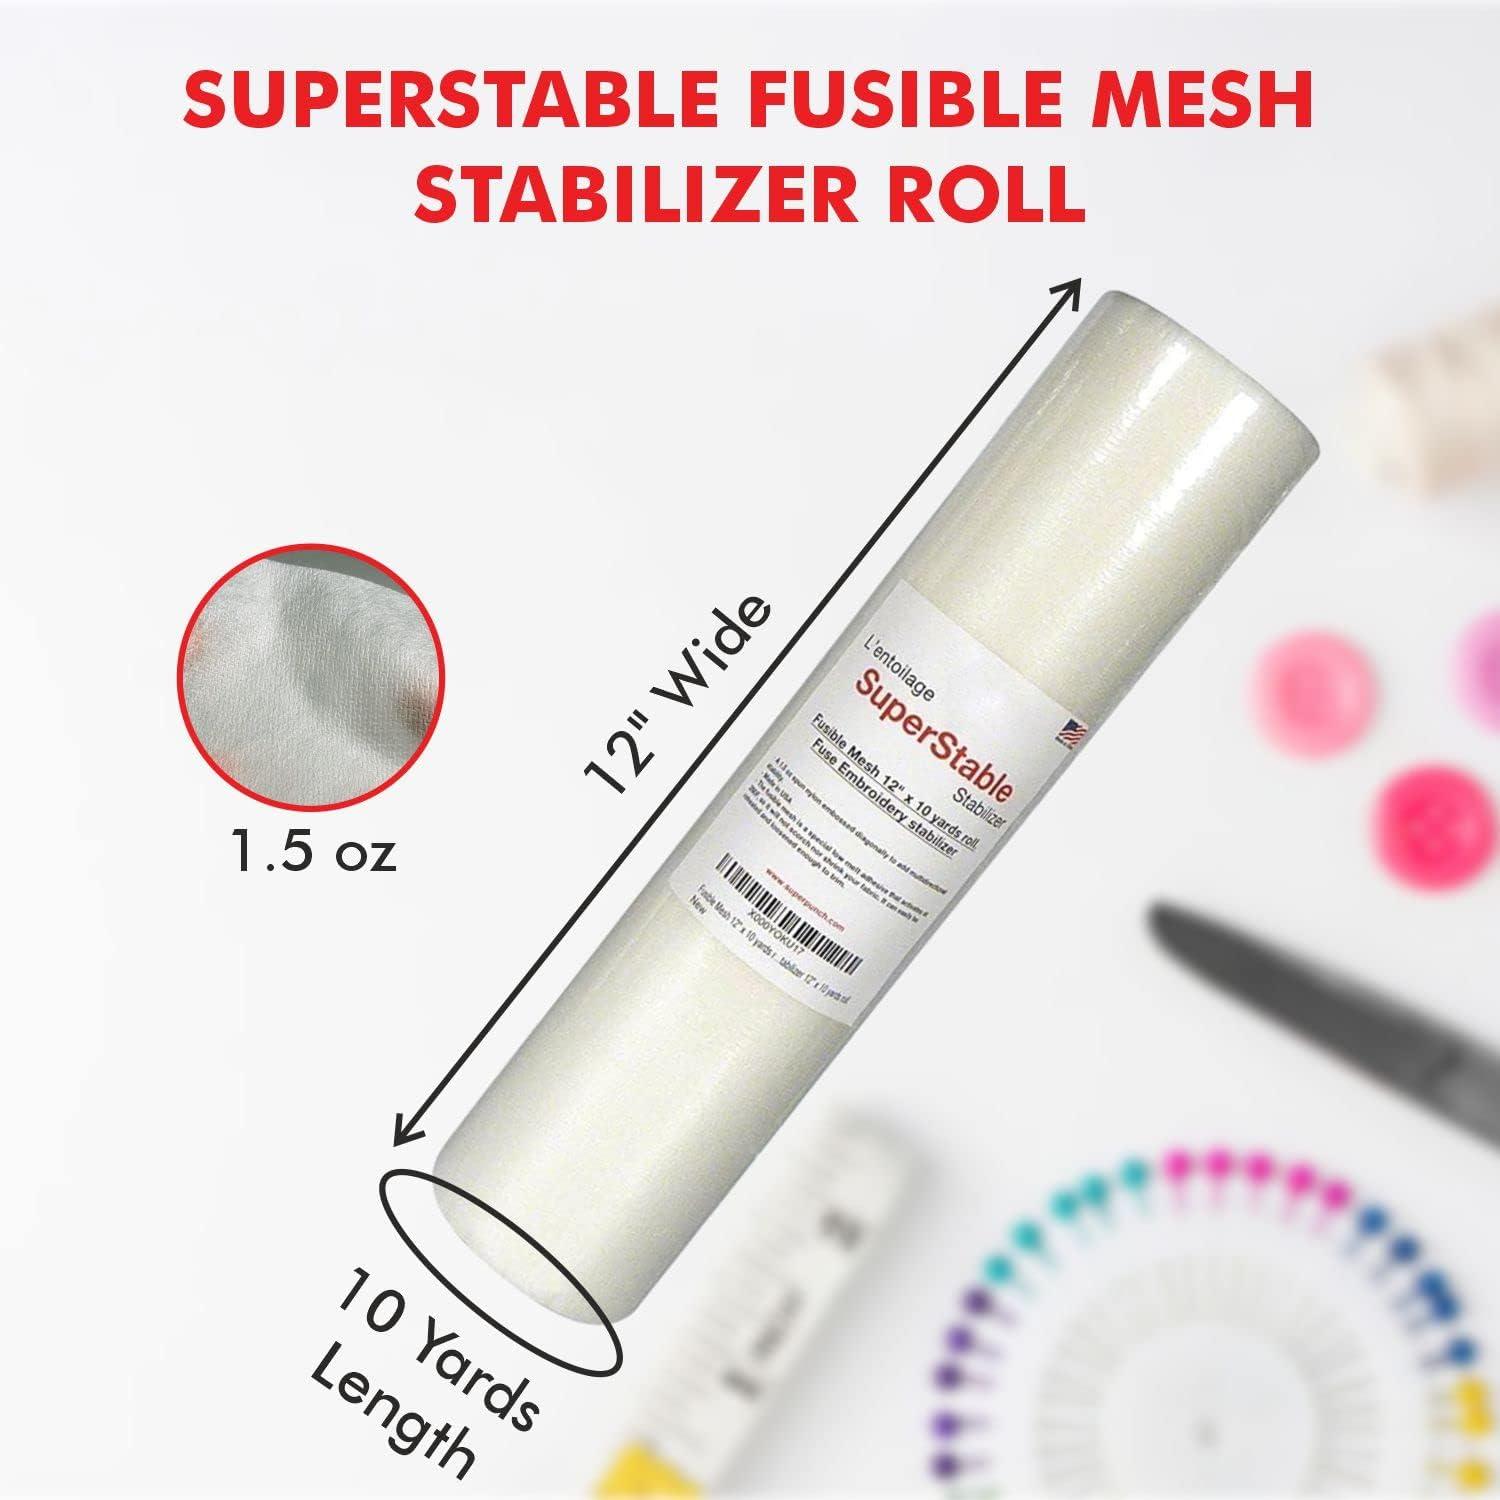 Buy Superpunch Invisible No-Show Mesh Stabilizer, 1.5 oz Cutaway